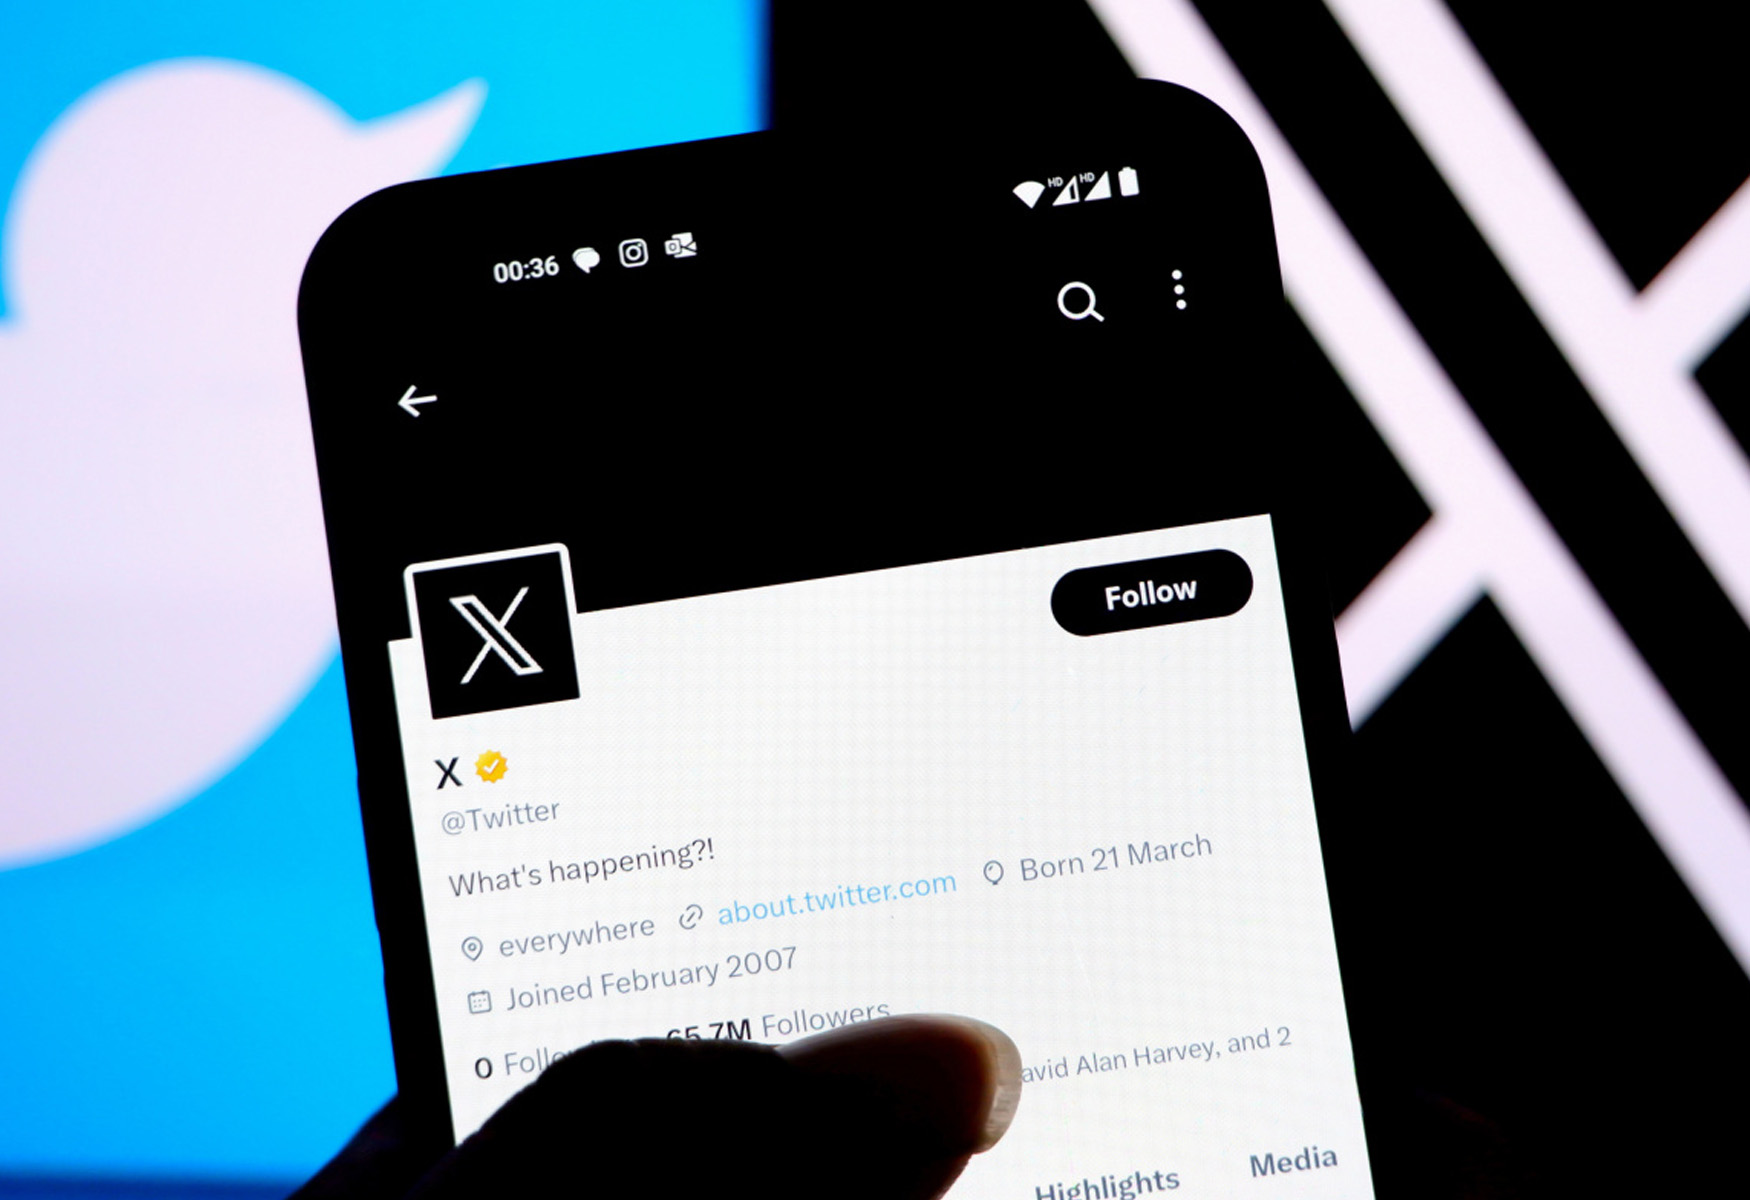 X Introduces New Control To Restrict Replies To Verified Accounts